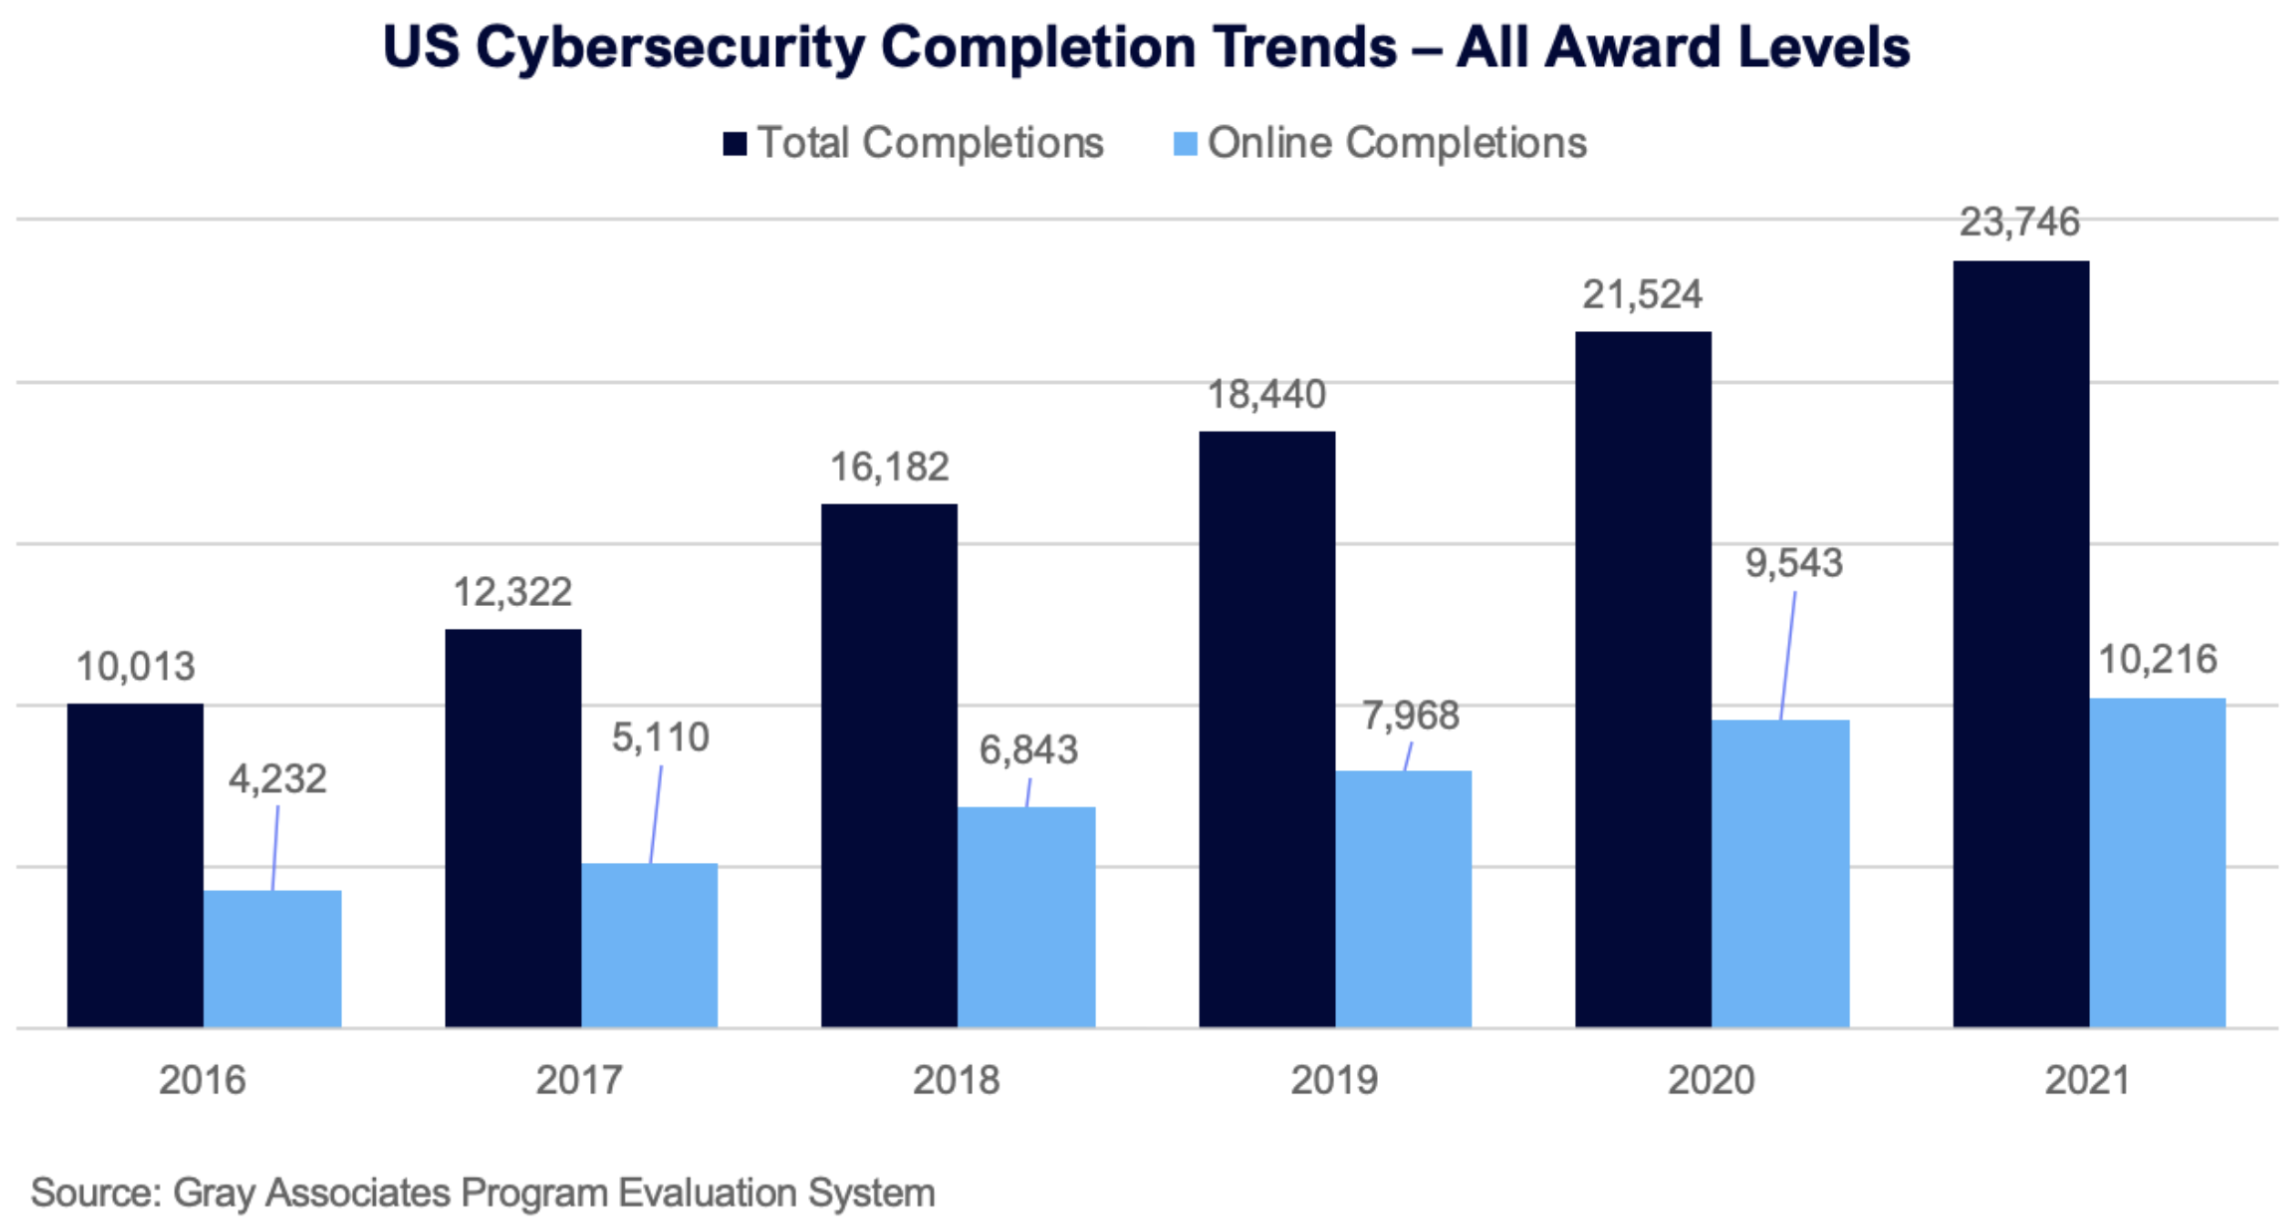 US Cybersecurity Completions Trends - All awards levels 